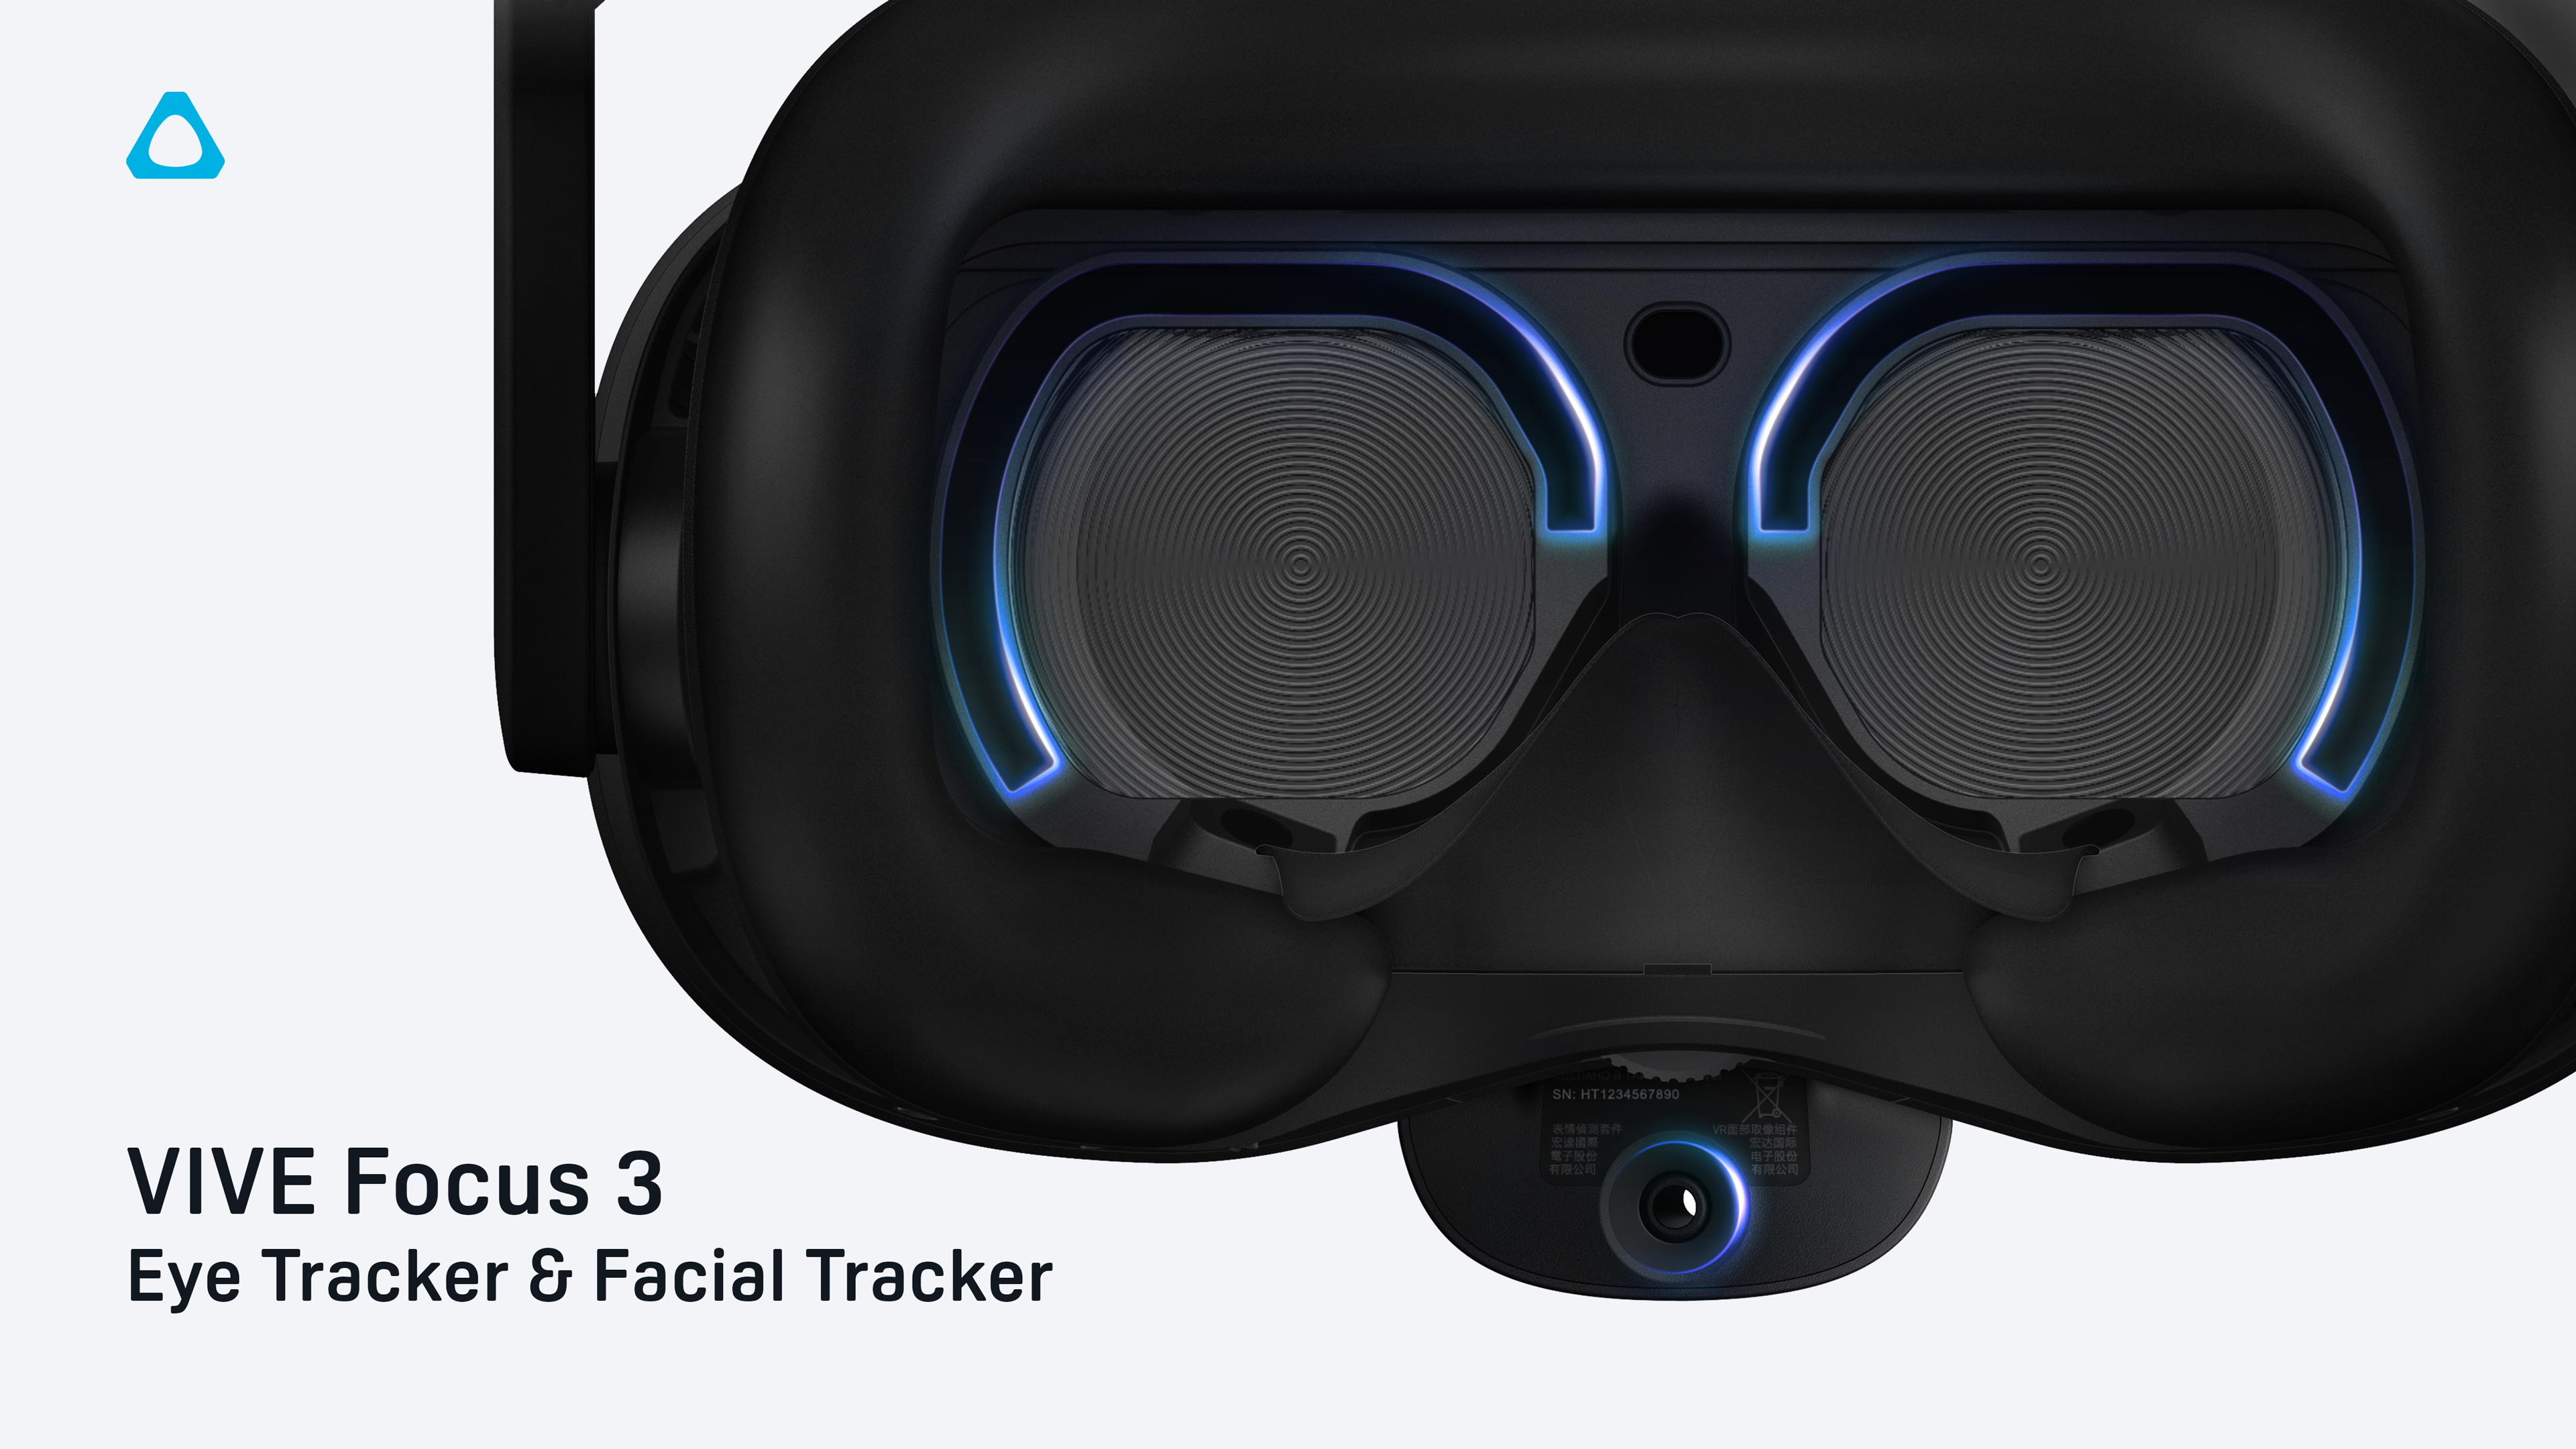 Focus 3 gets Facial Tracker, and Eye VIVE